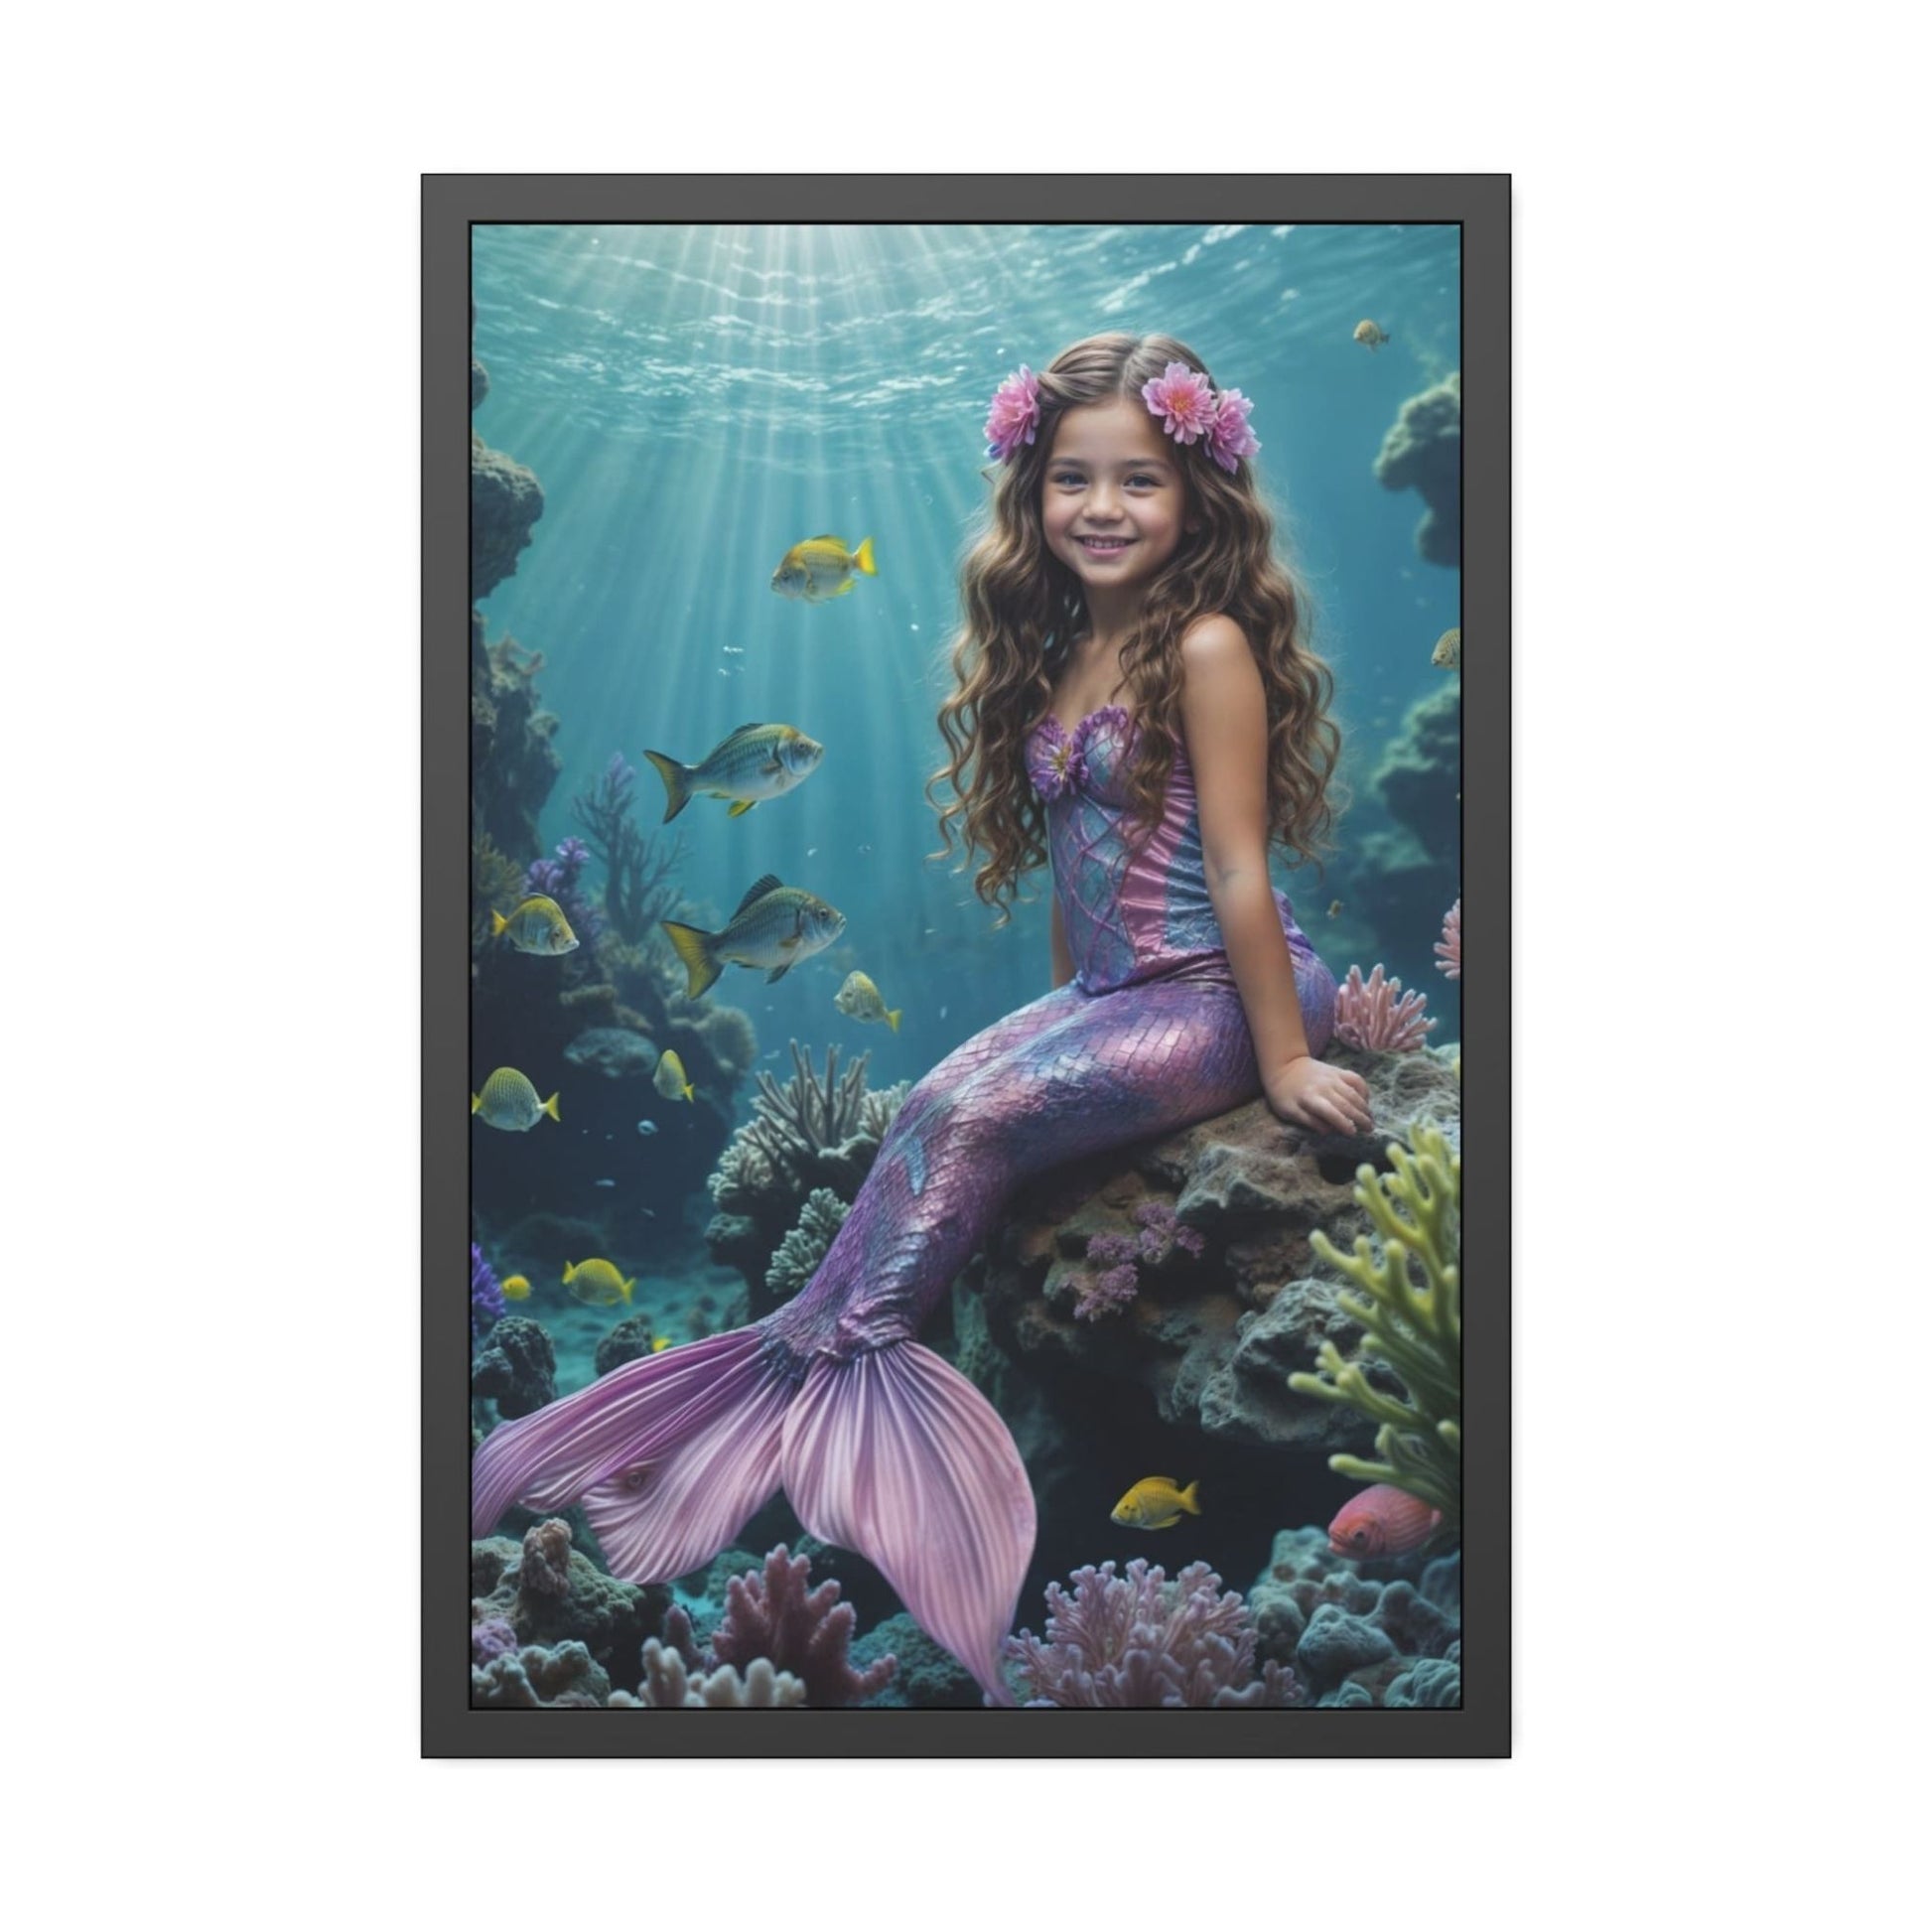 Enchant your loved ones with a Custom Mermaid Portrait from Photo. Personalize a Princess Mermaid Portrait for your daughter's Birthday or add magical Wall Art to her room. Perfect for daughters, sisters, moms, or girlfriends, our Custom Mermaid Art portraits make unforgettable gifts. Transform photos into personalized mermaid keepsakes for any special occasion.